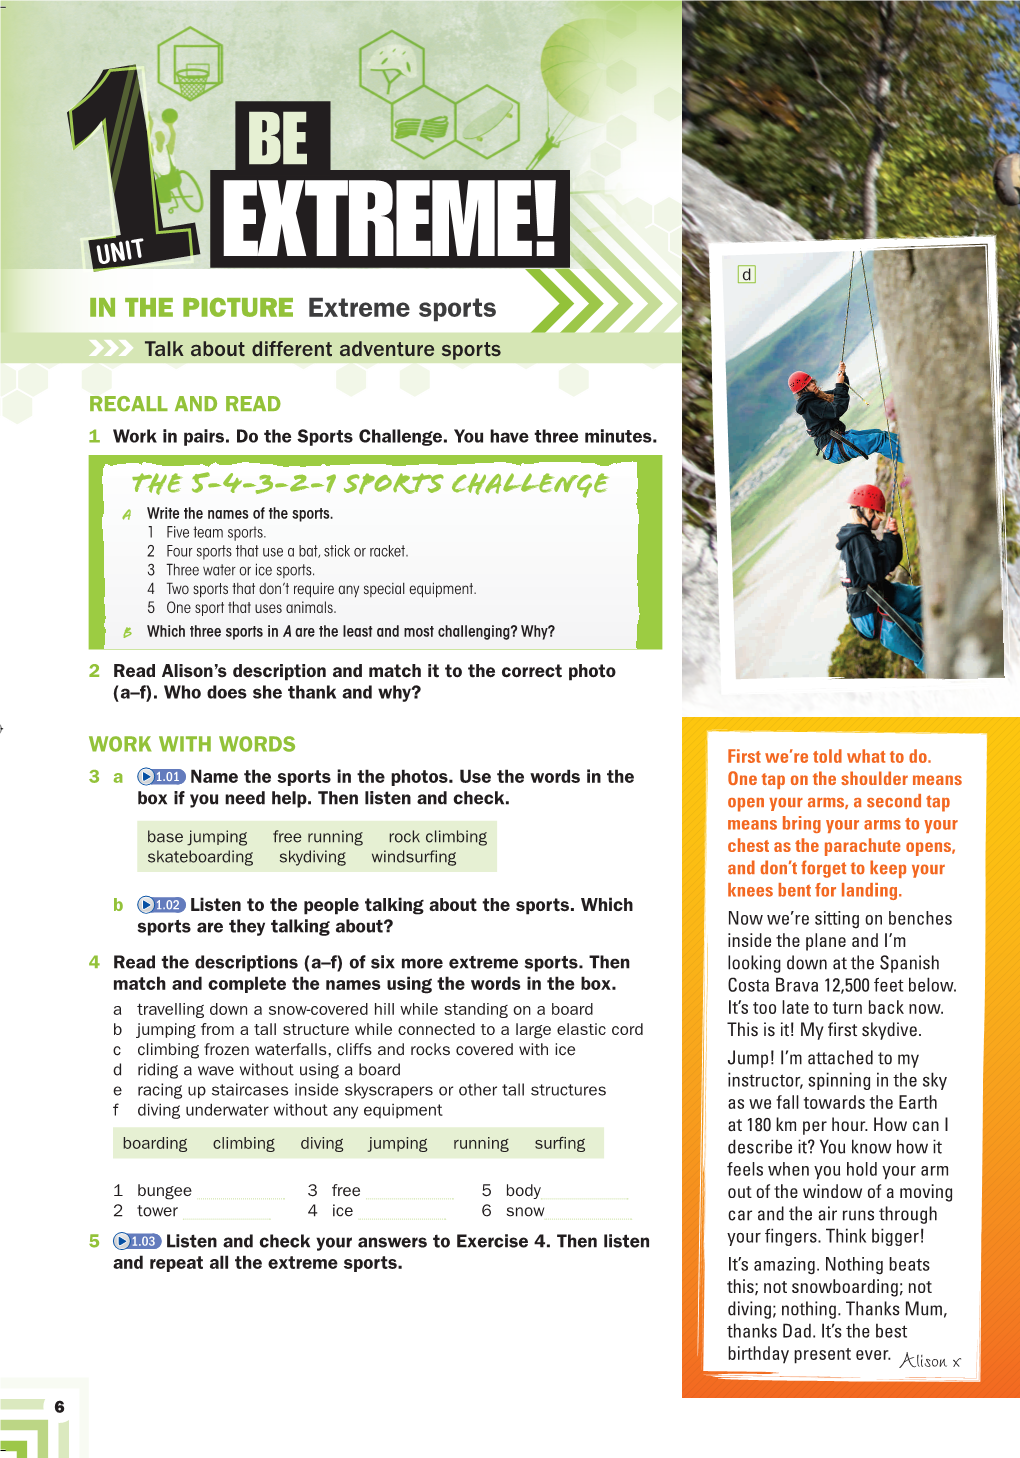 IN the PICTURE Extreme Sports Talk About Different Adventure Sports